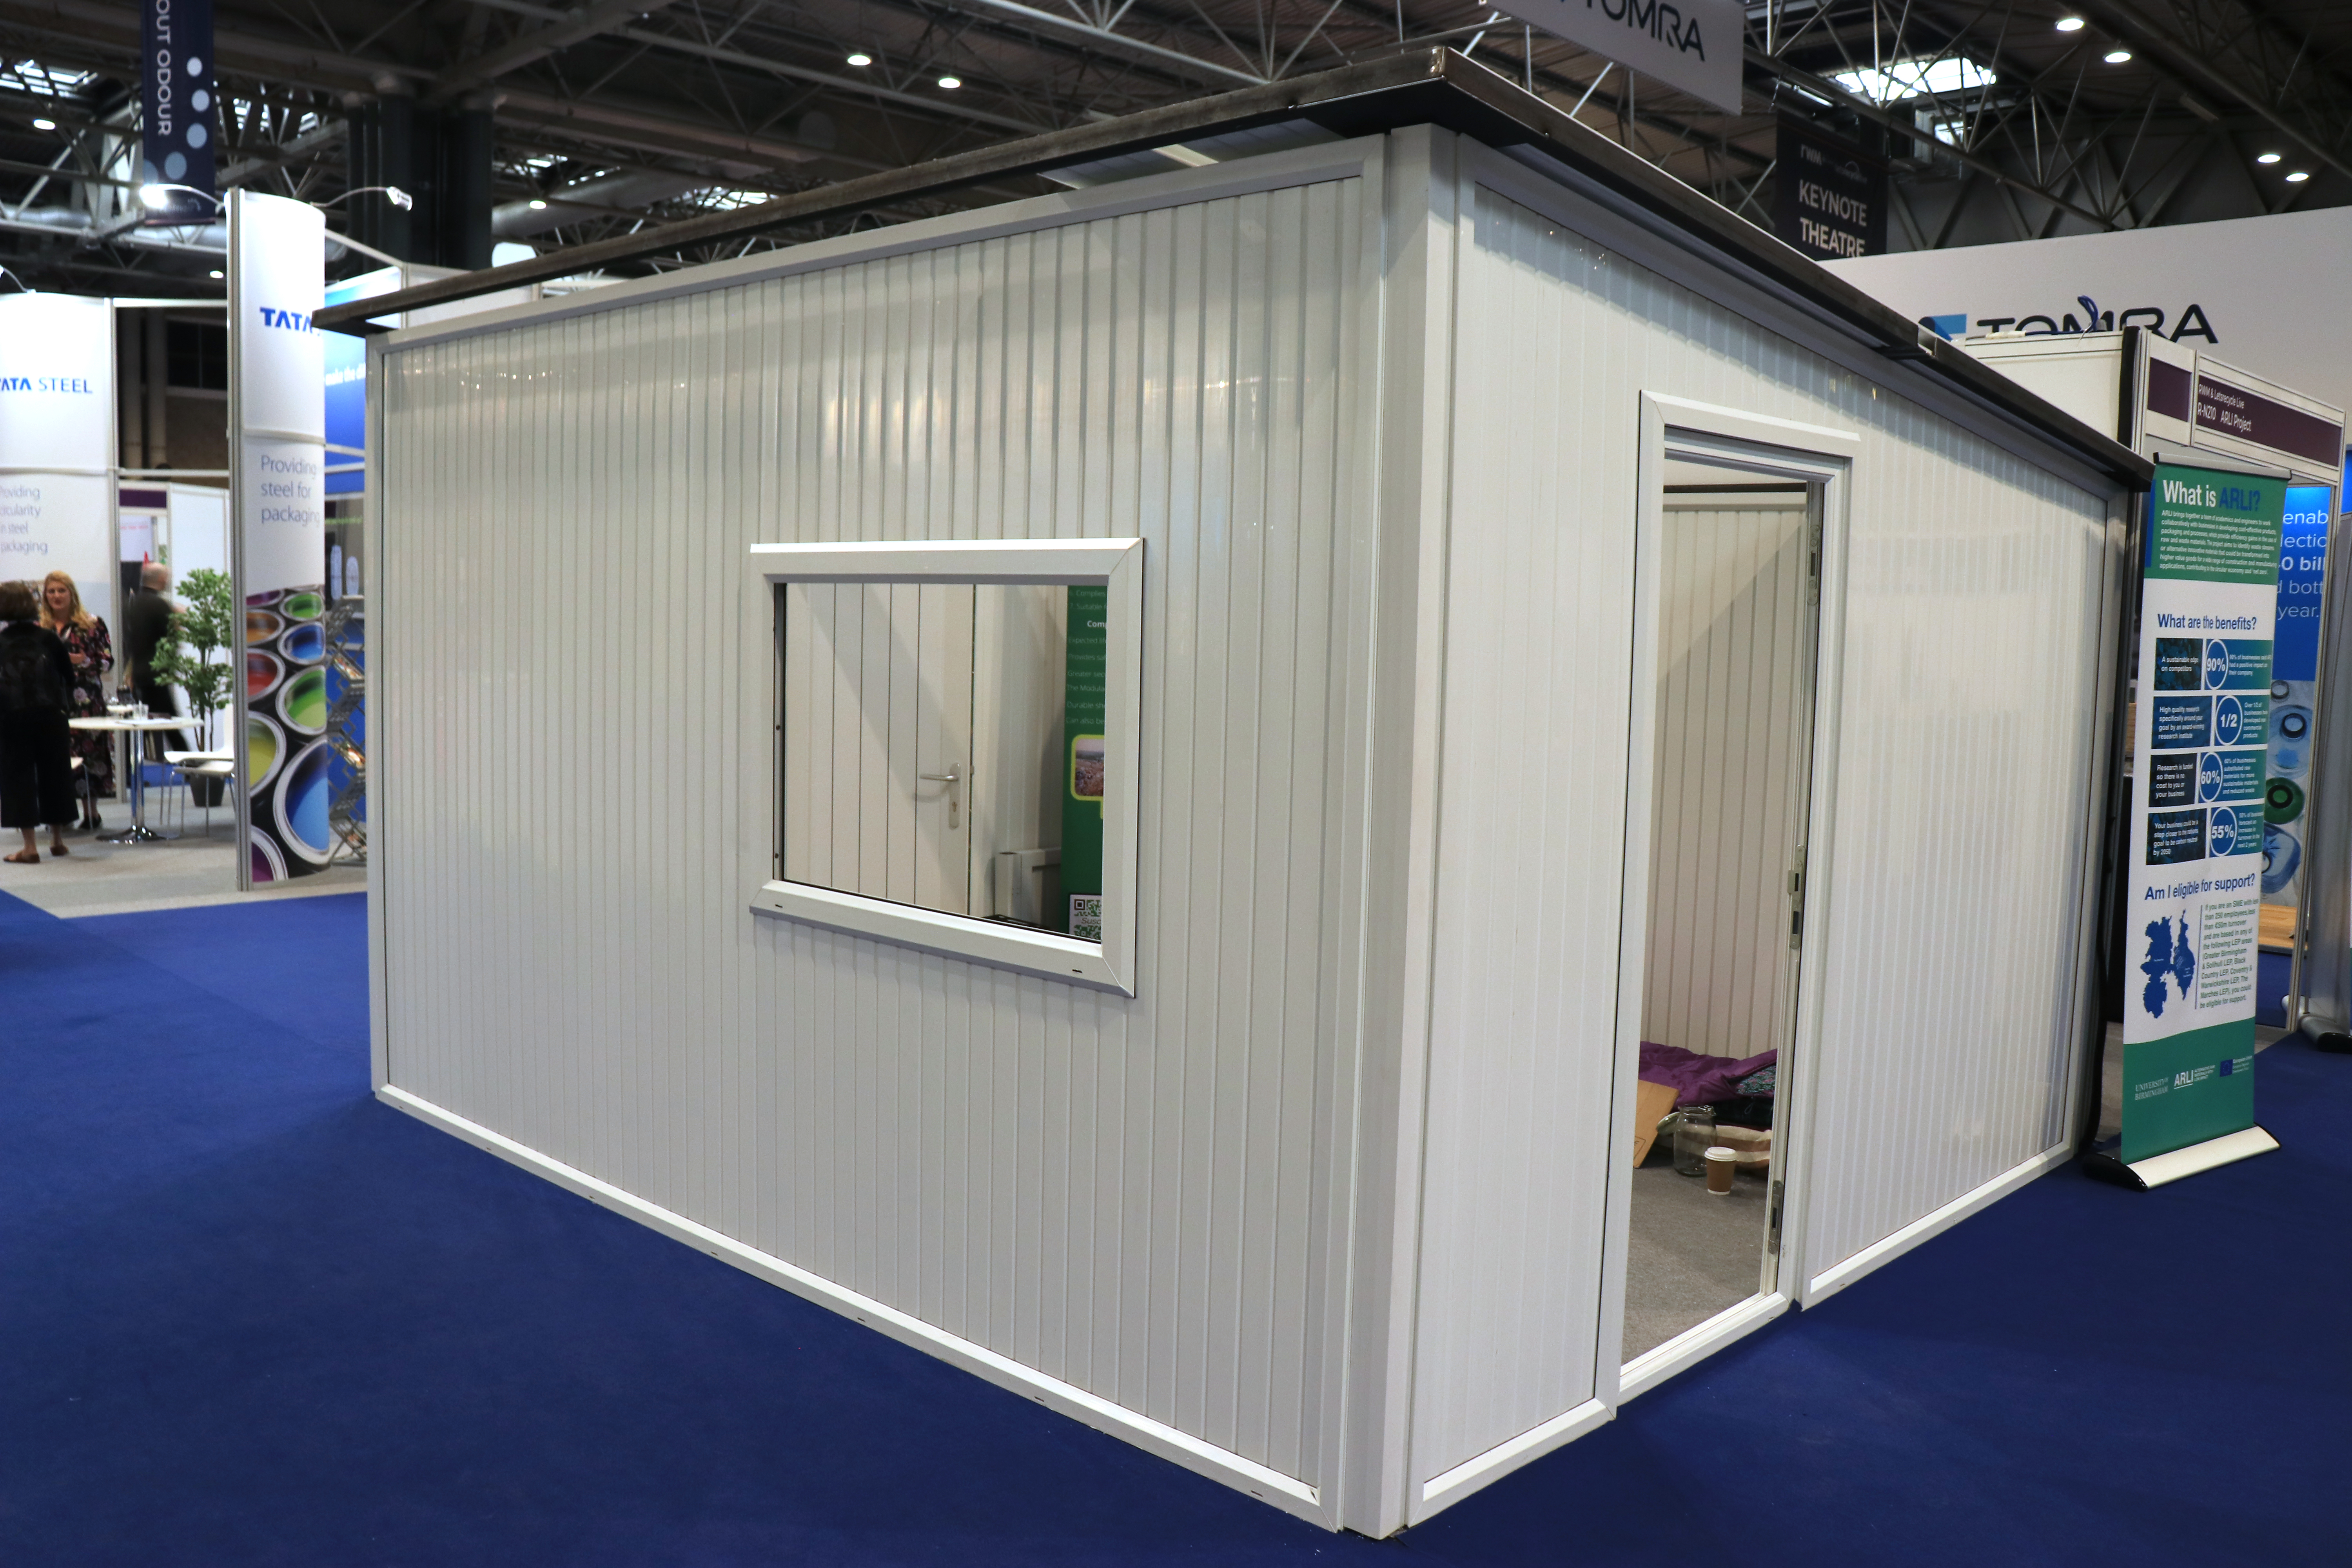 A new type of emergency relief shelter (ERS) presented in Dubai by University of Birmingham and Suscons